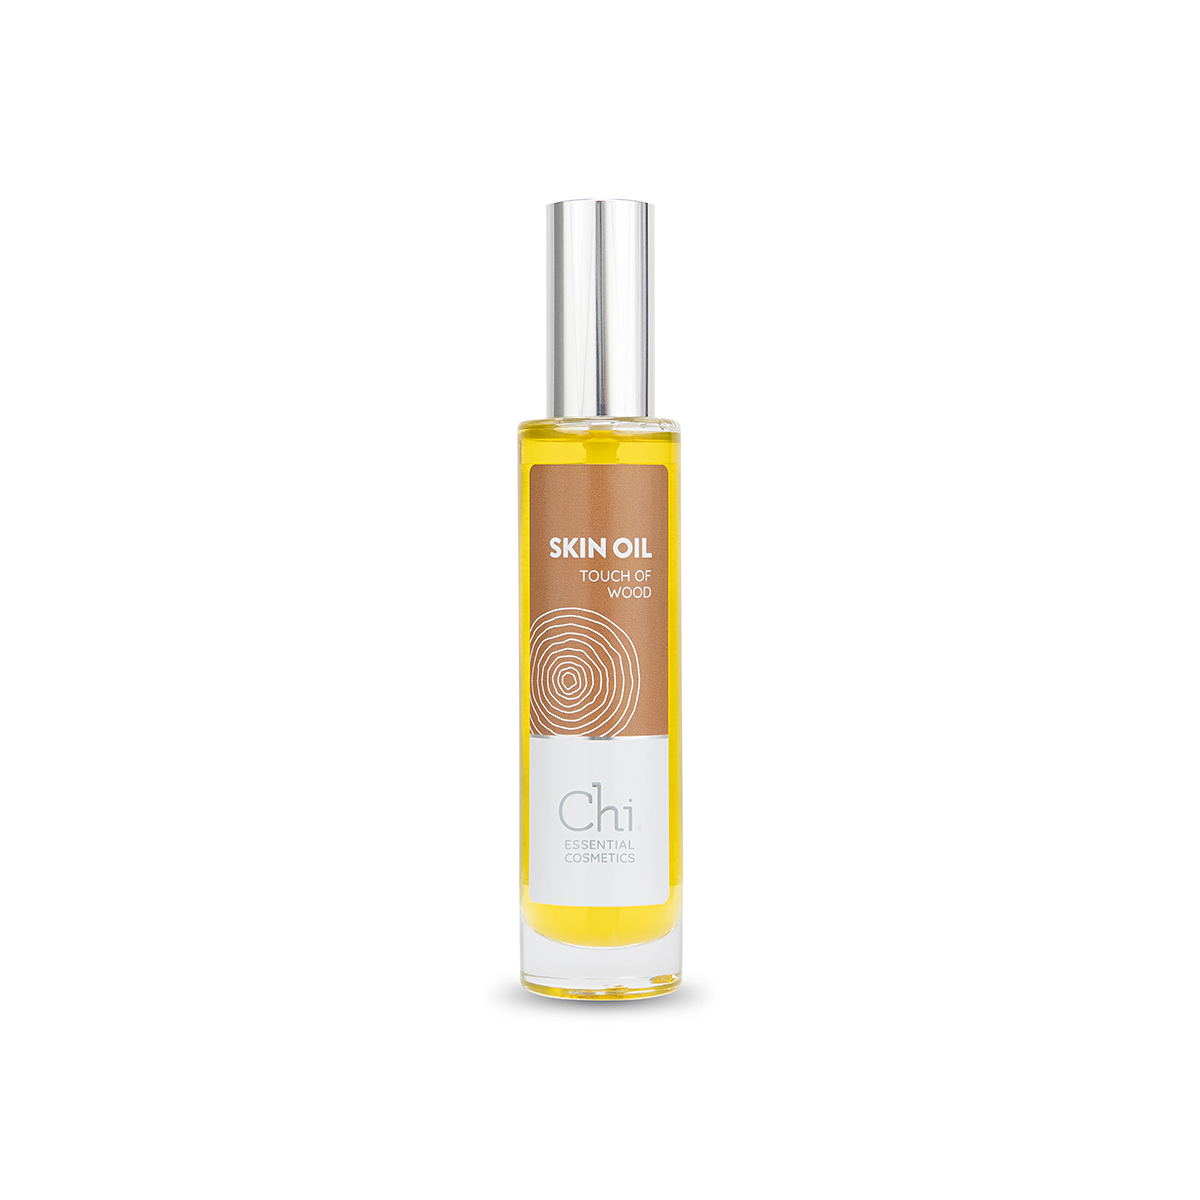 a touch of wood - skin oil